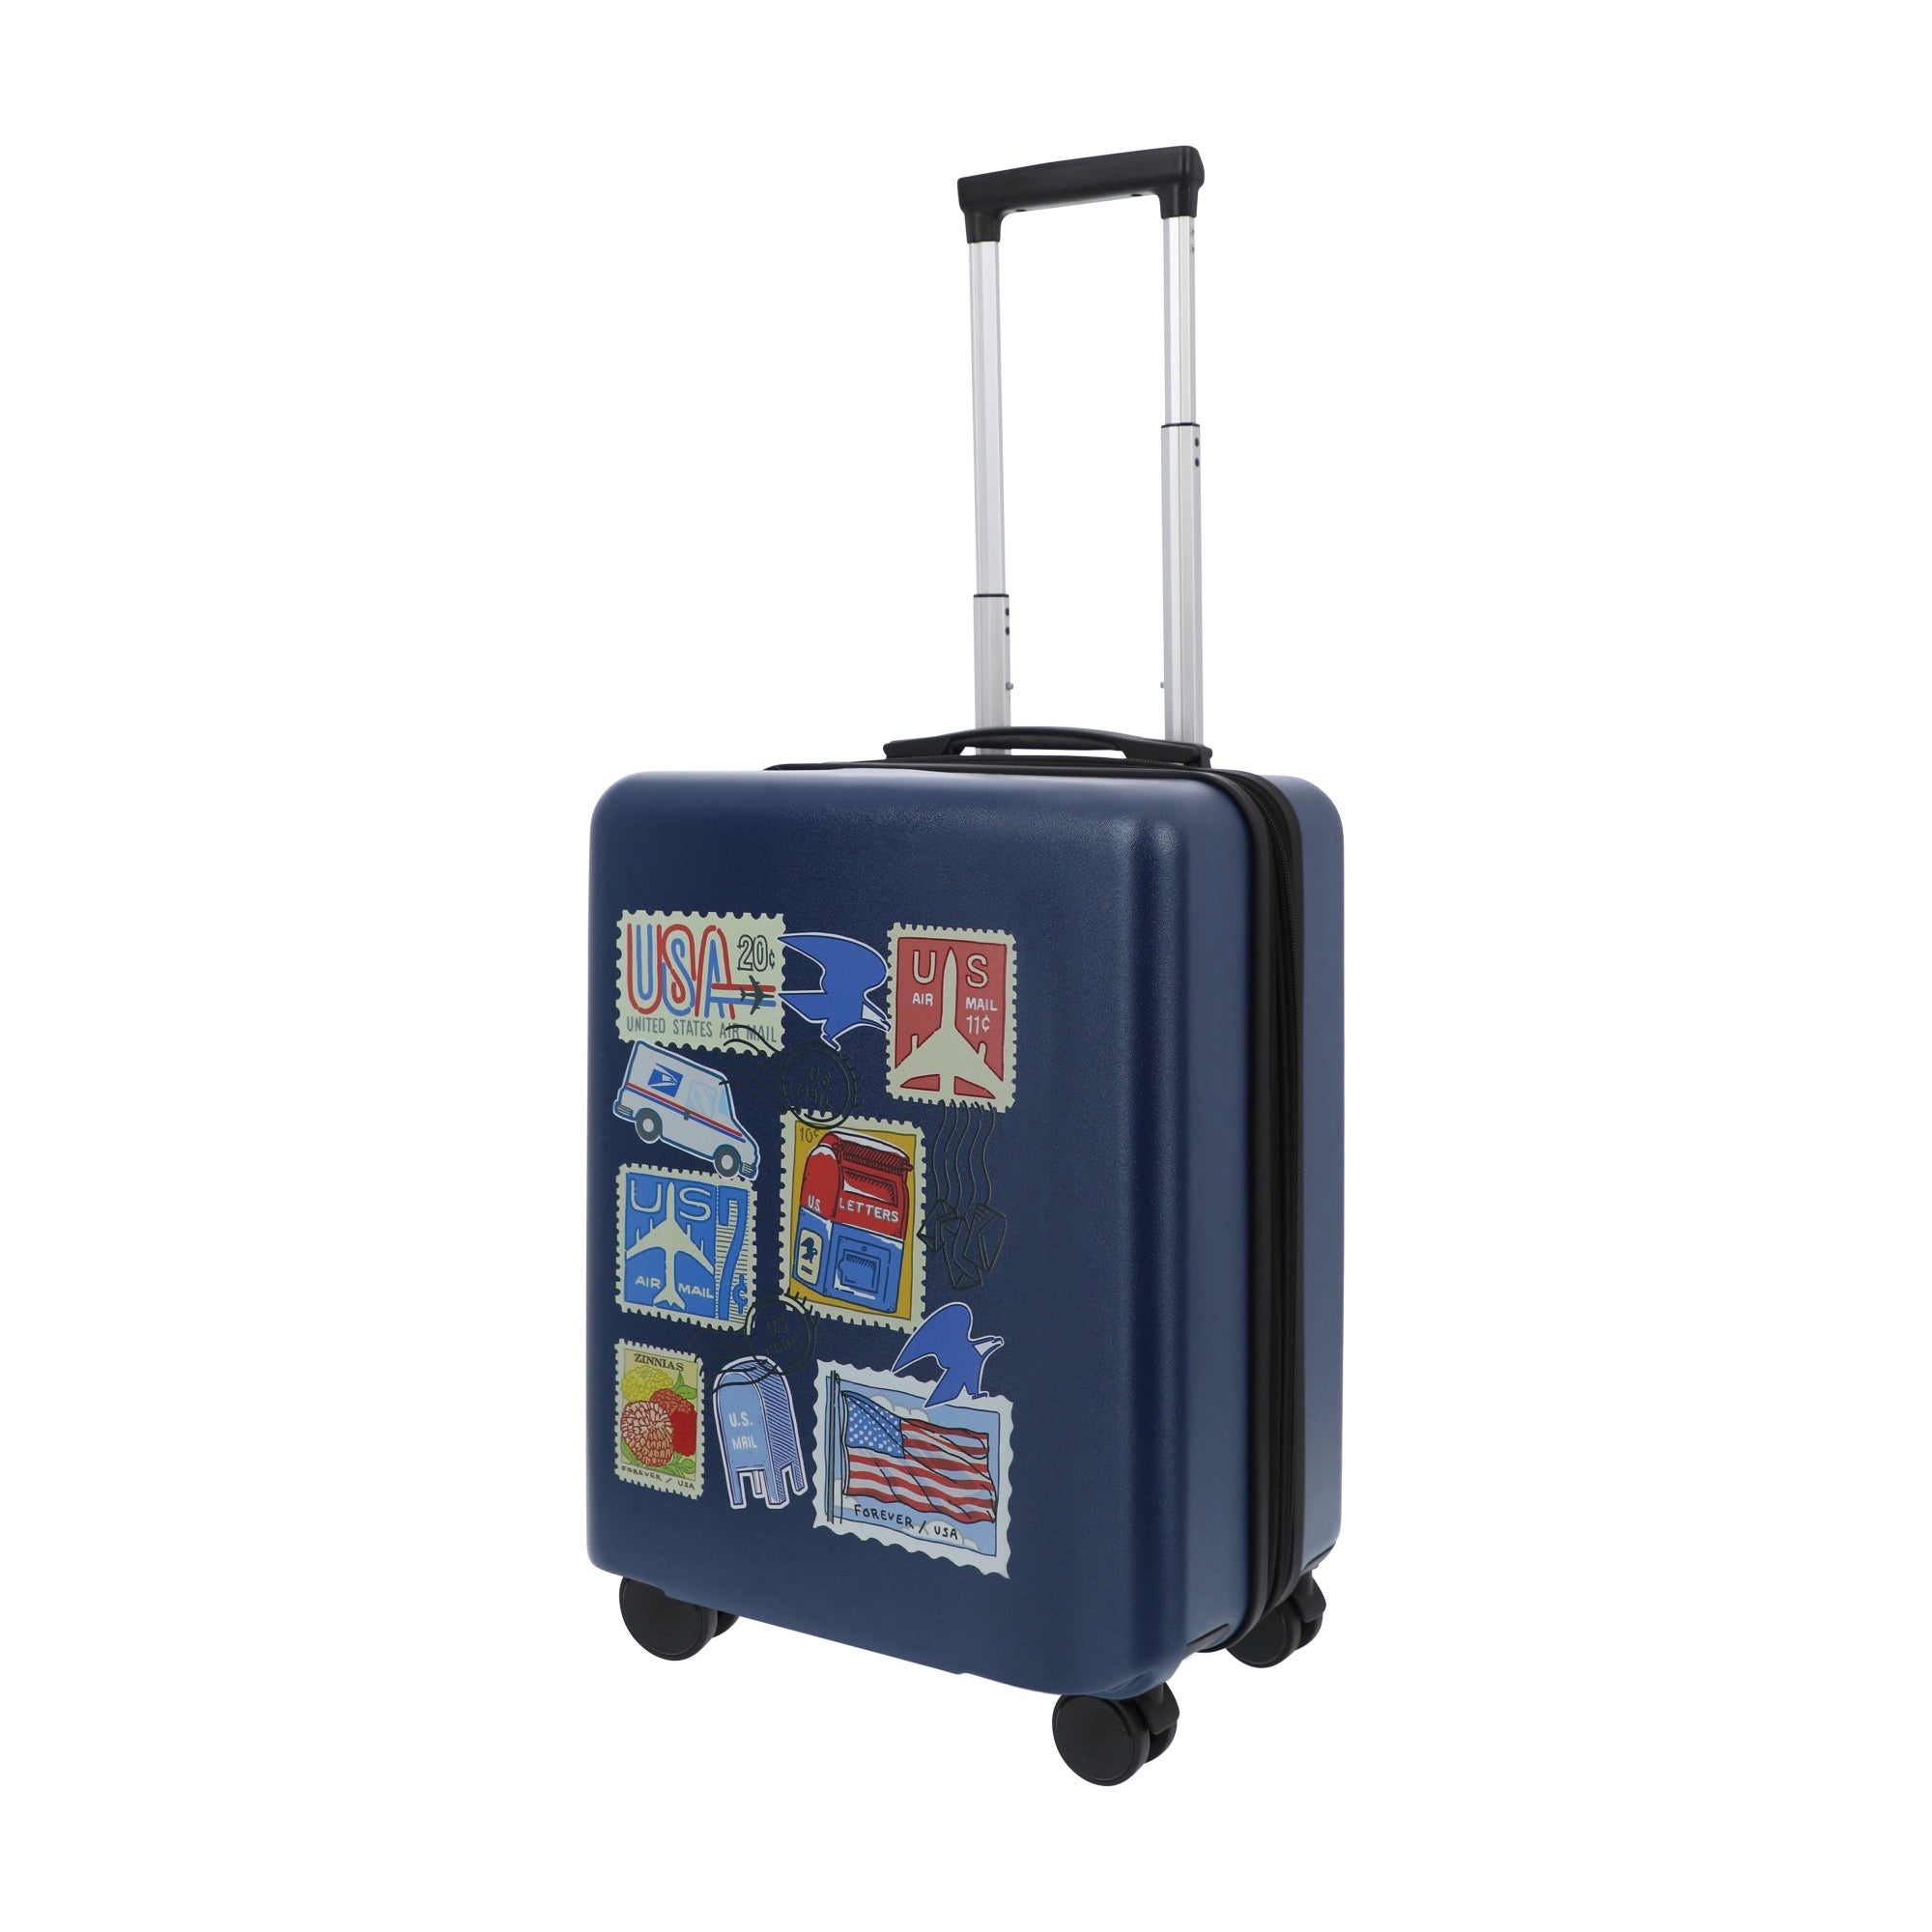 Navy blue USPS 22.5" carry-on spinner suitcase luggage by Ful